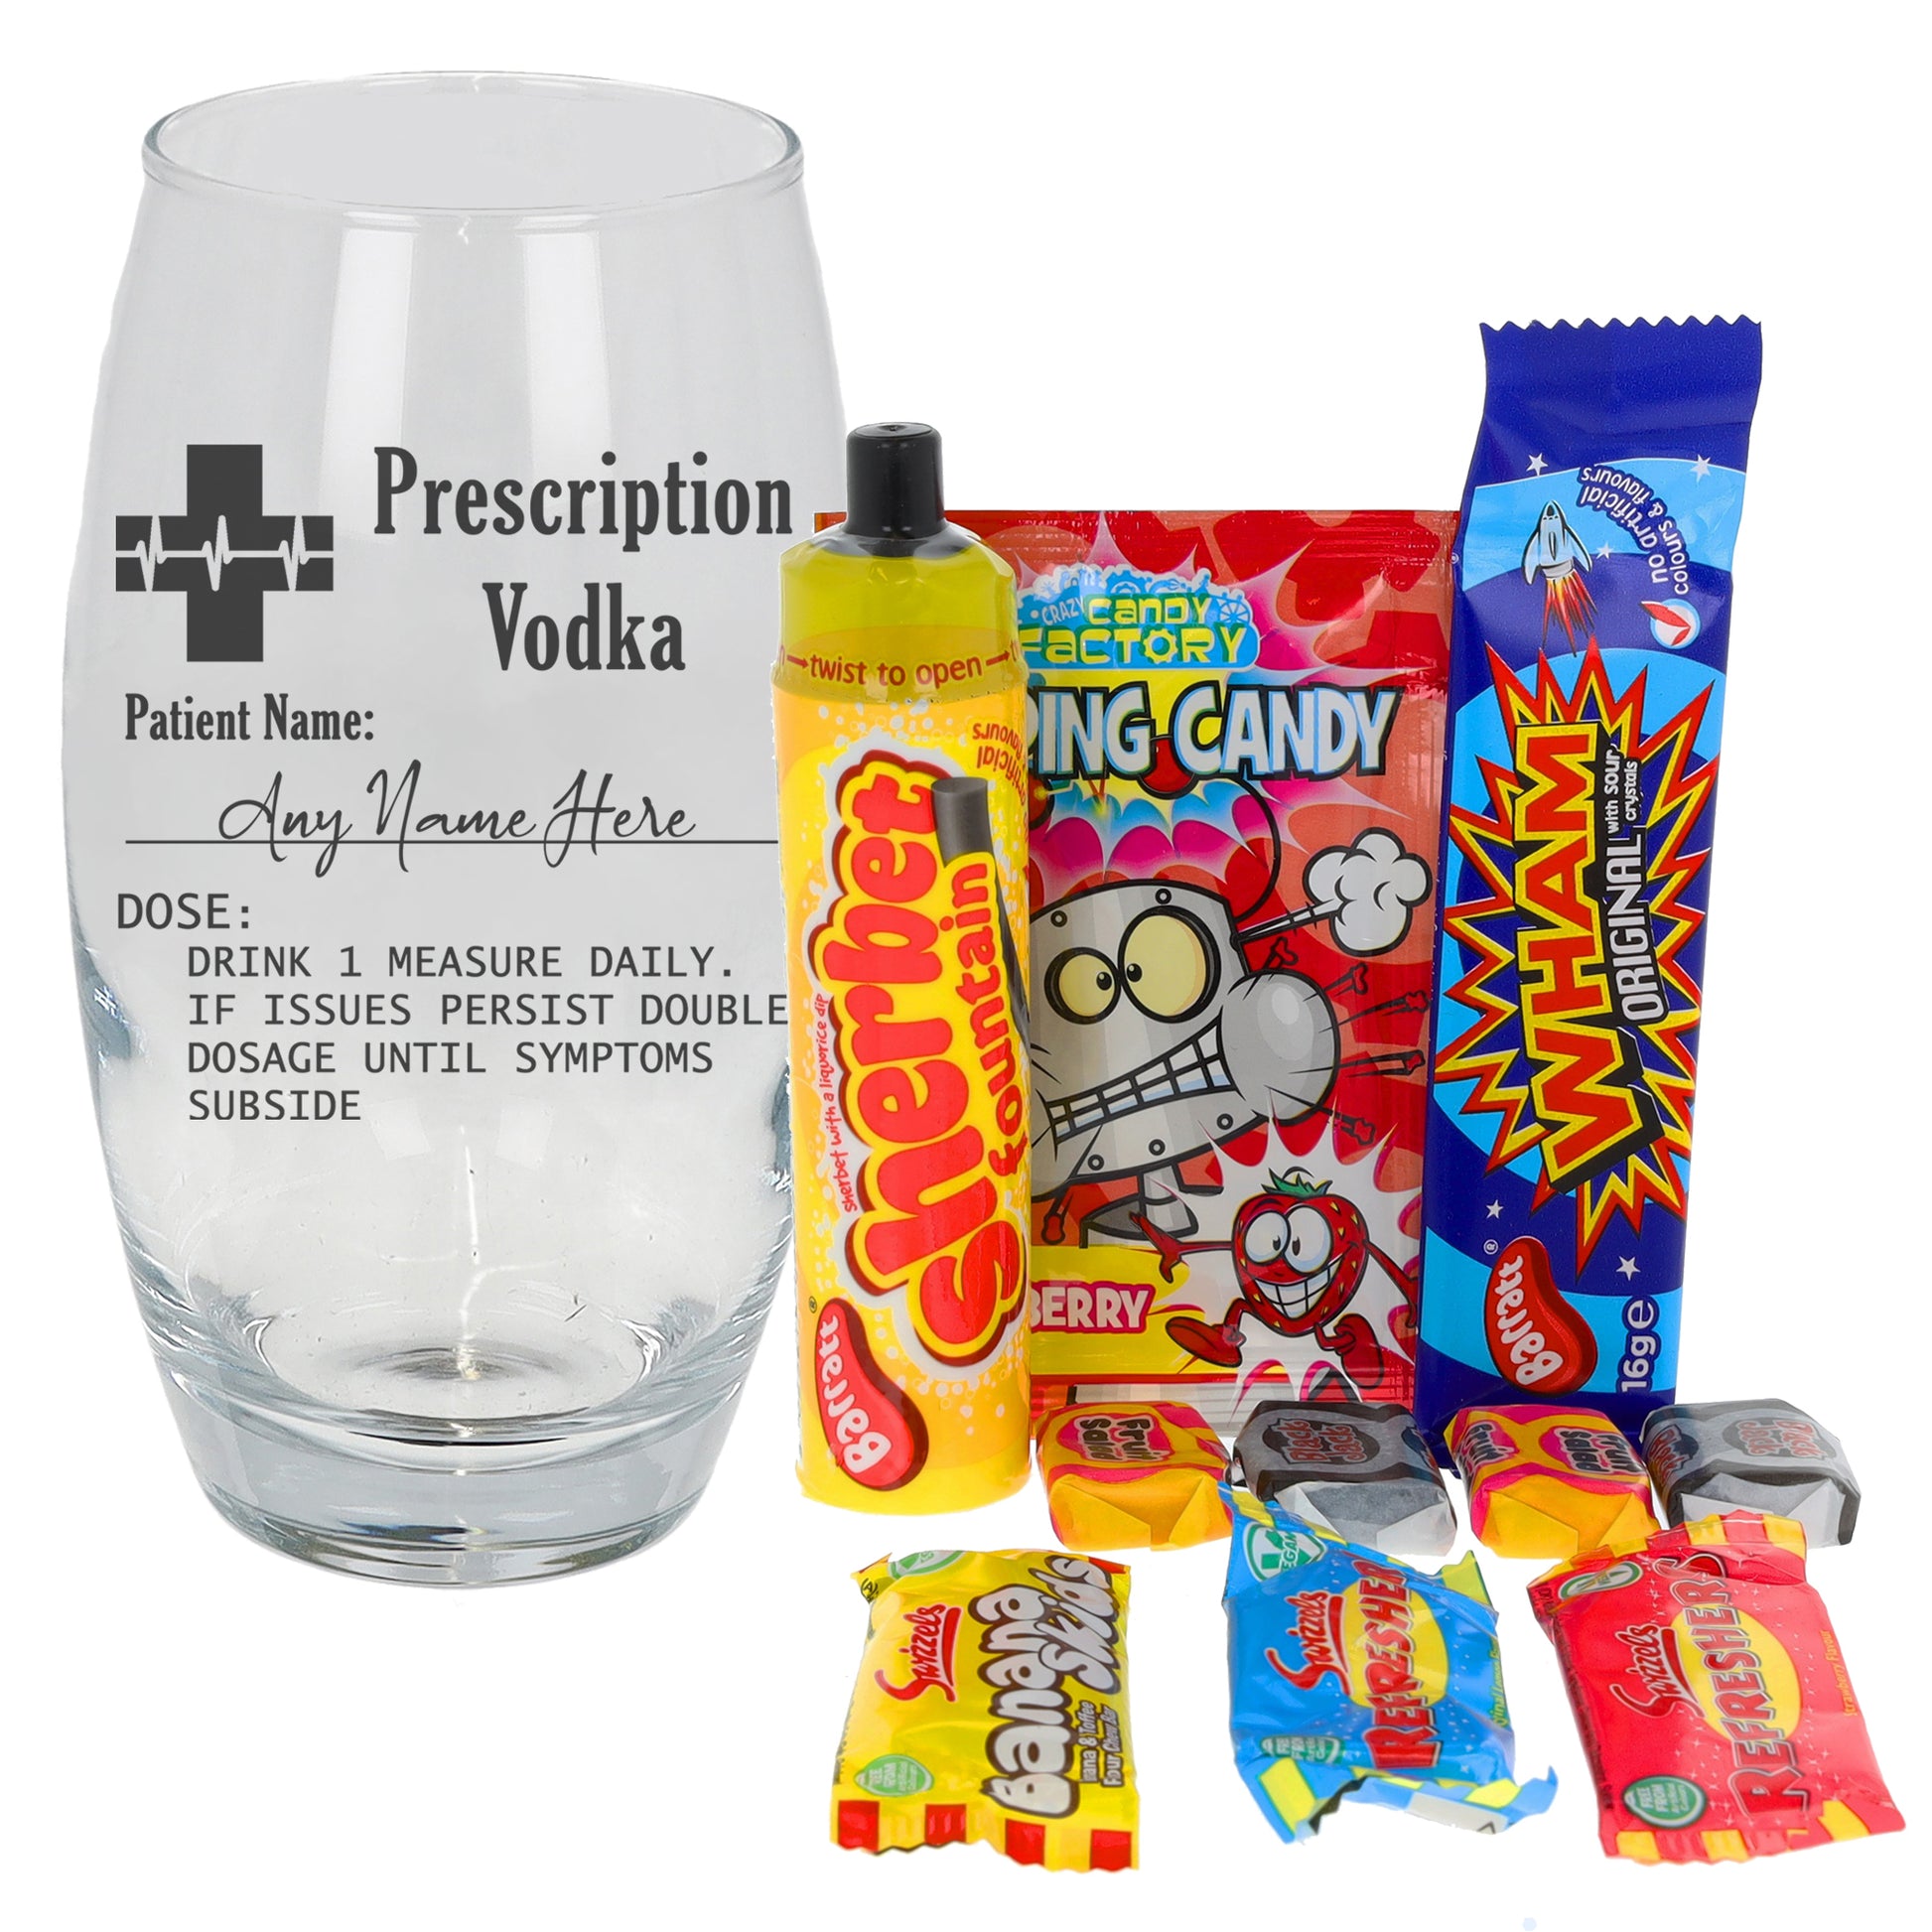 Personalised Engraved Prescription Vodka Glass with any Name  - Always Looking Good - Filled with Retro Sweets Large Tondo 